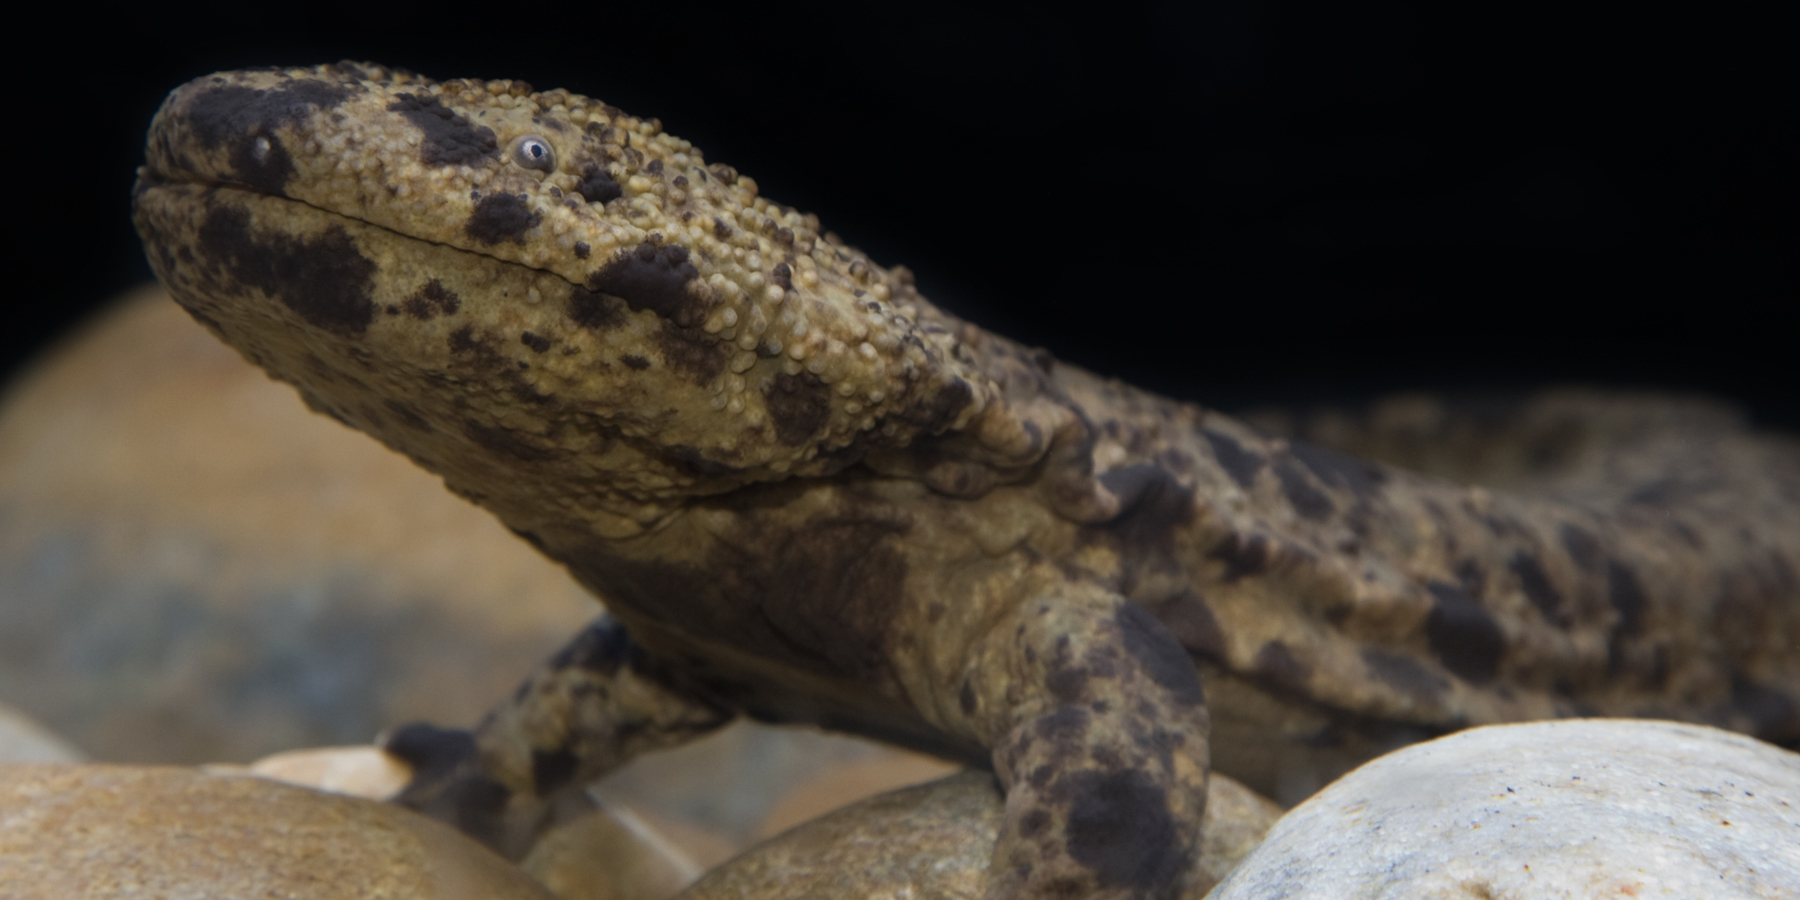 Japanese giant salamander at the Reptile Discovery Center